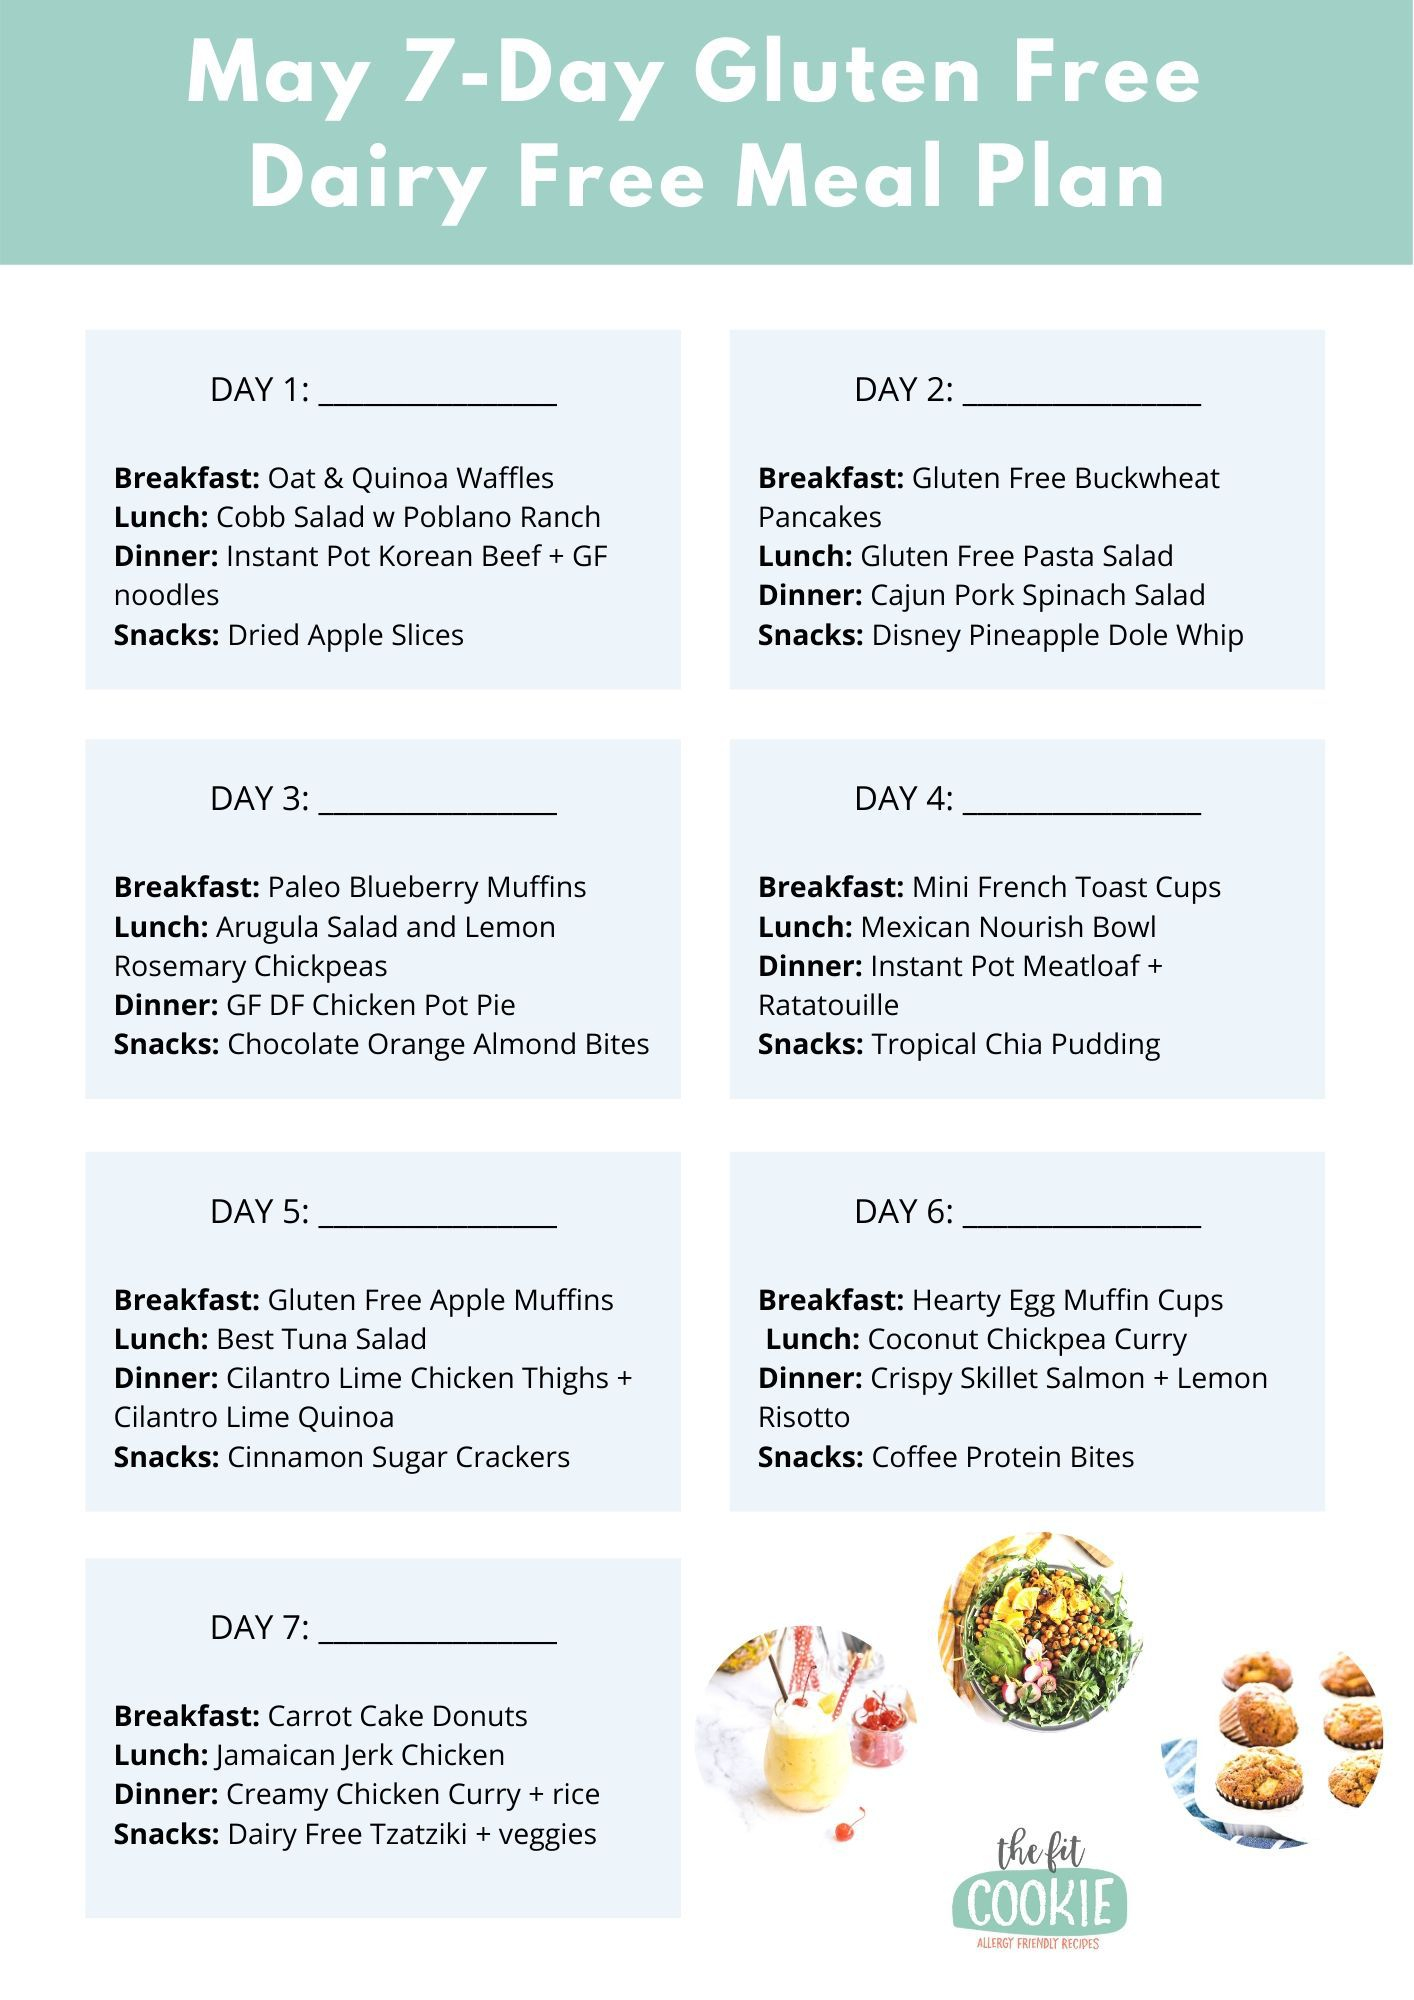 May 7 Day Gluten Free Dairy Free Meal Plan The Fit Cookie